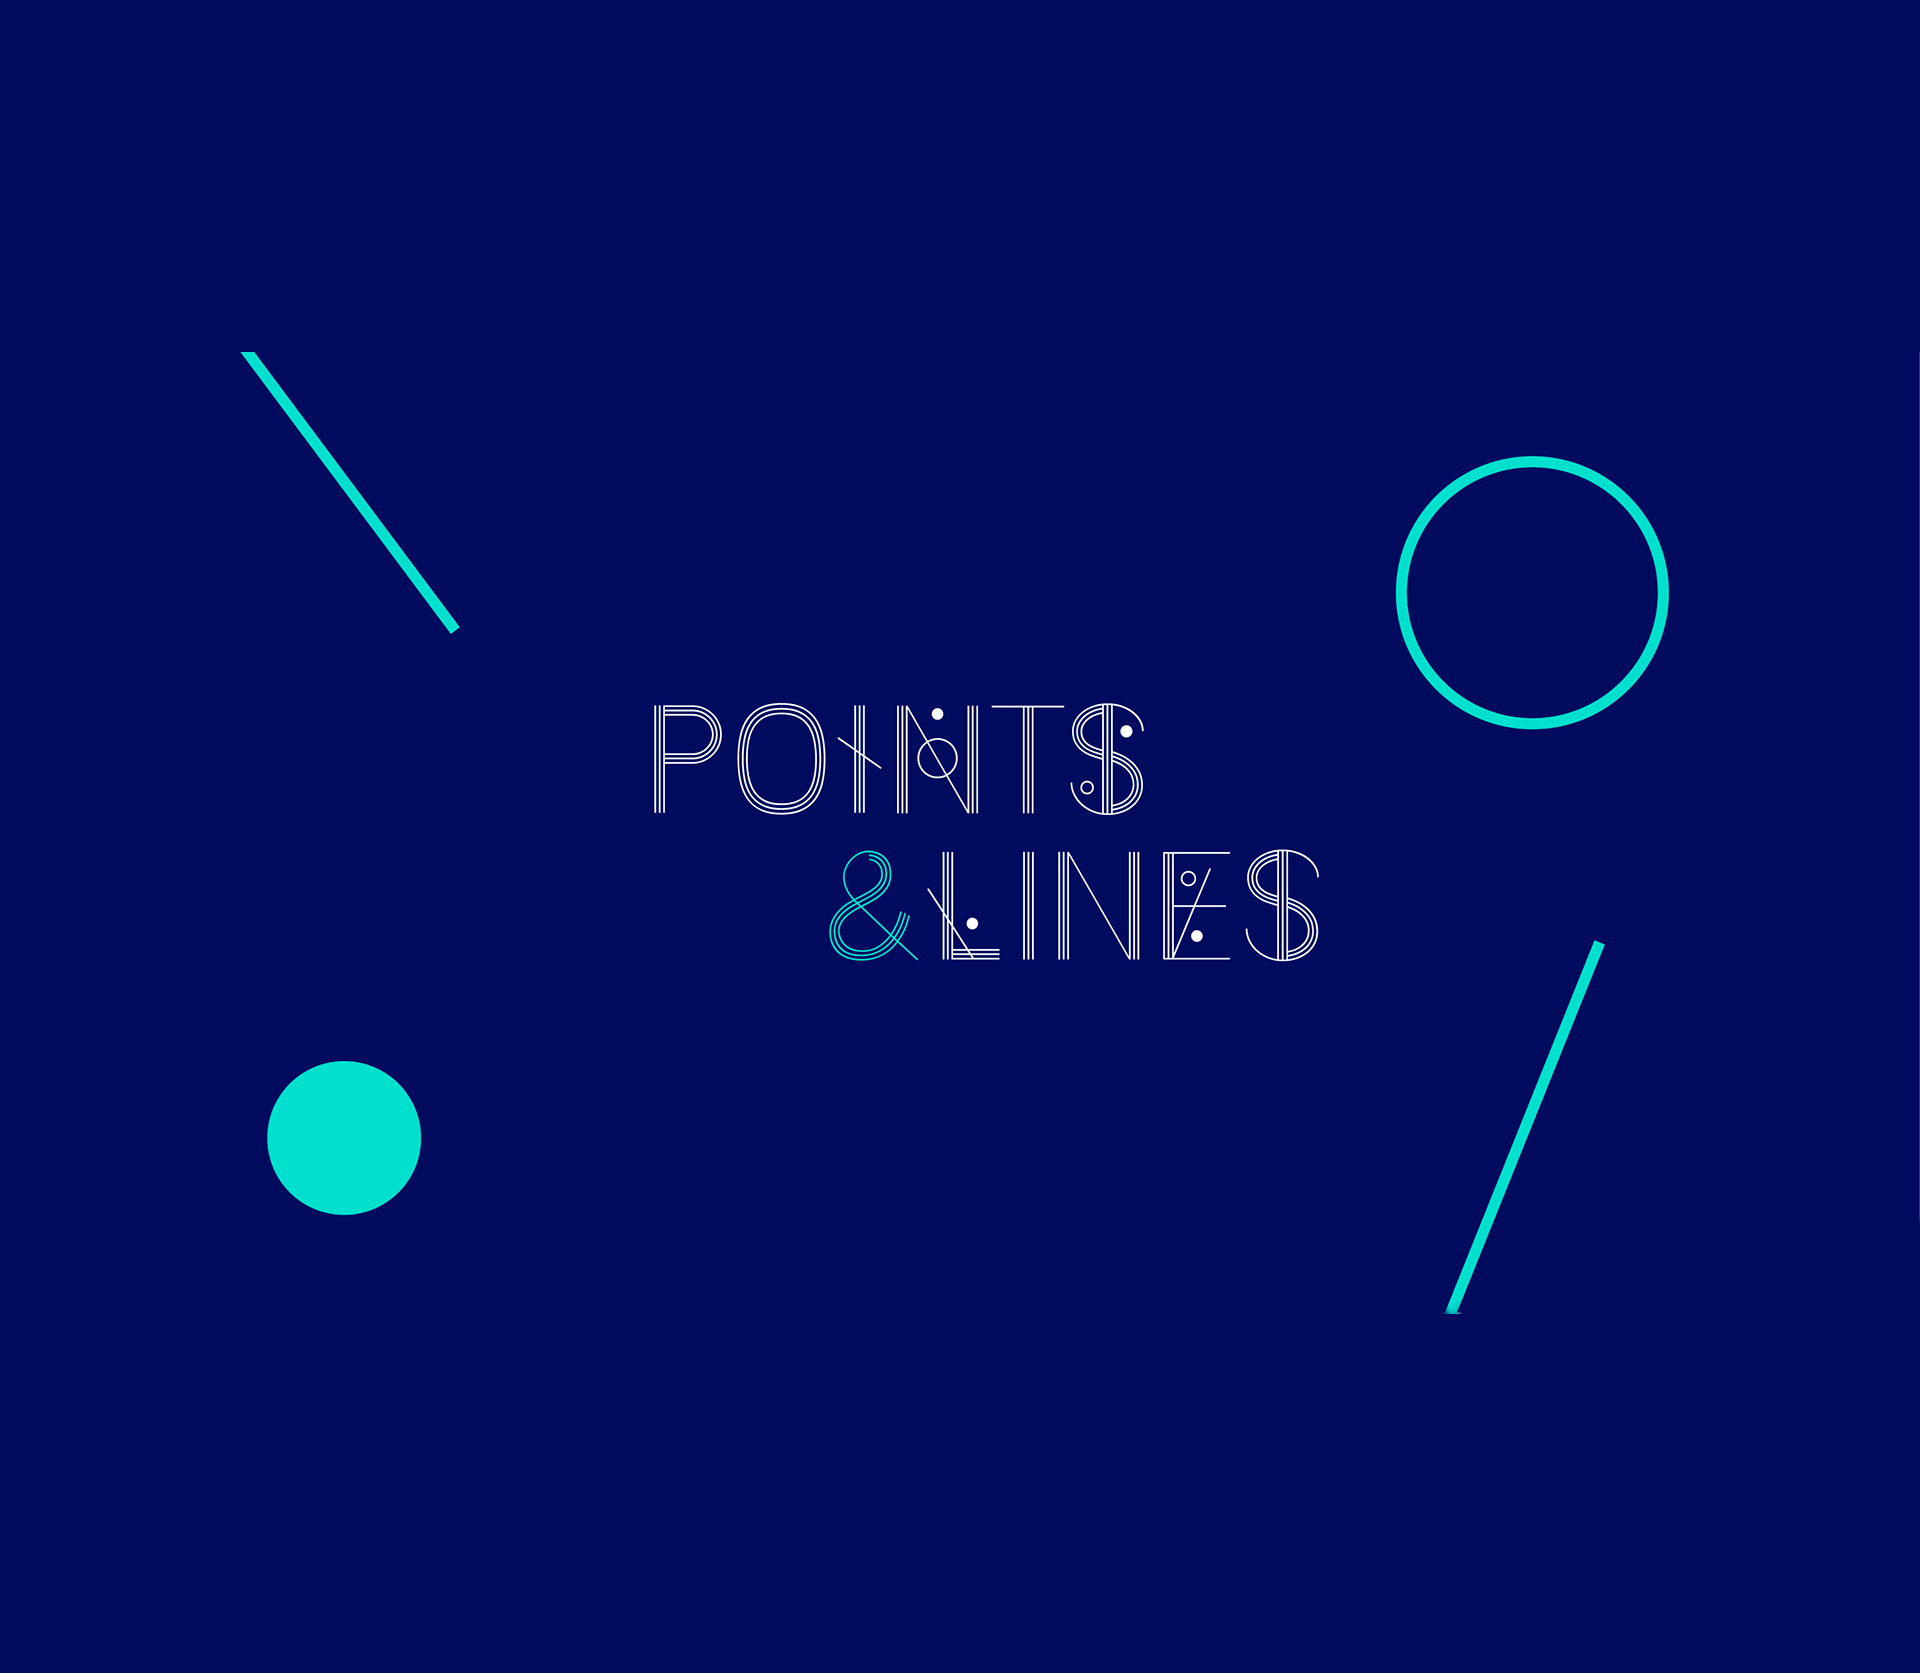 Police Points & Lines